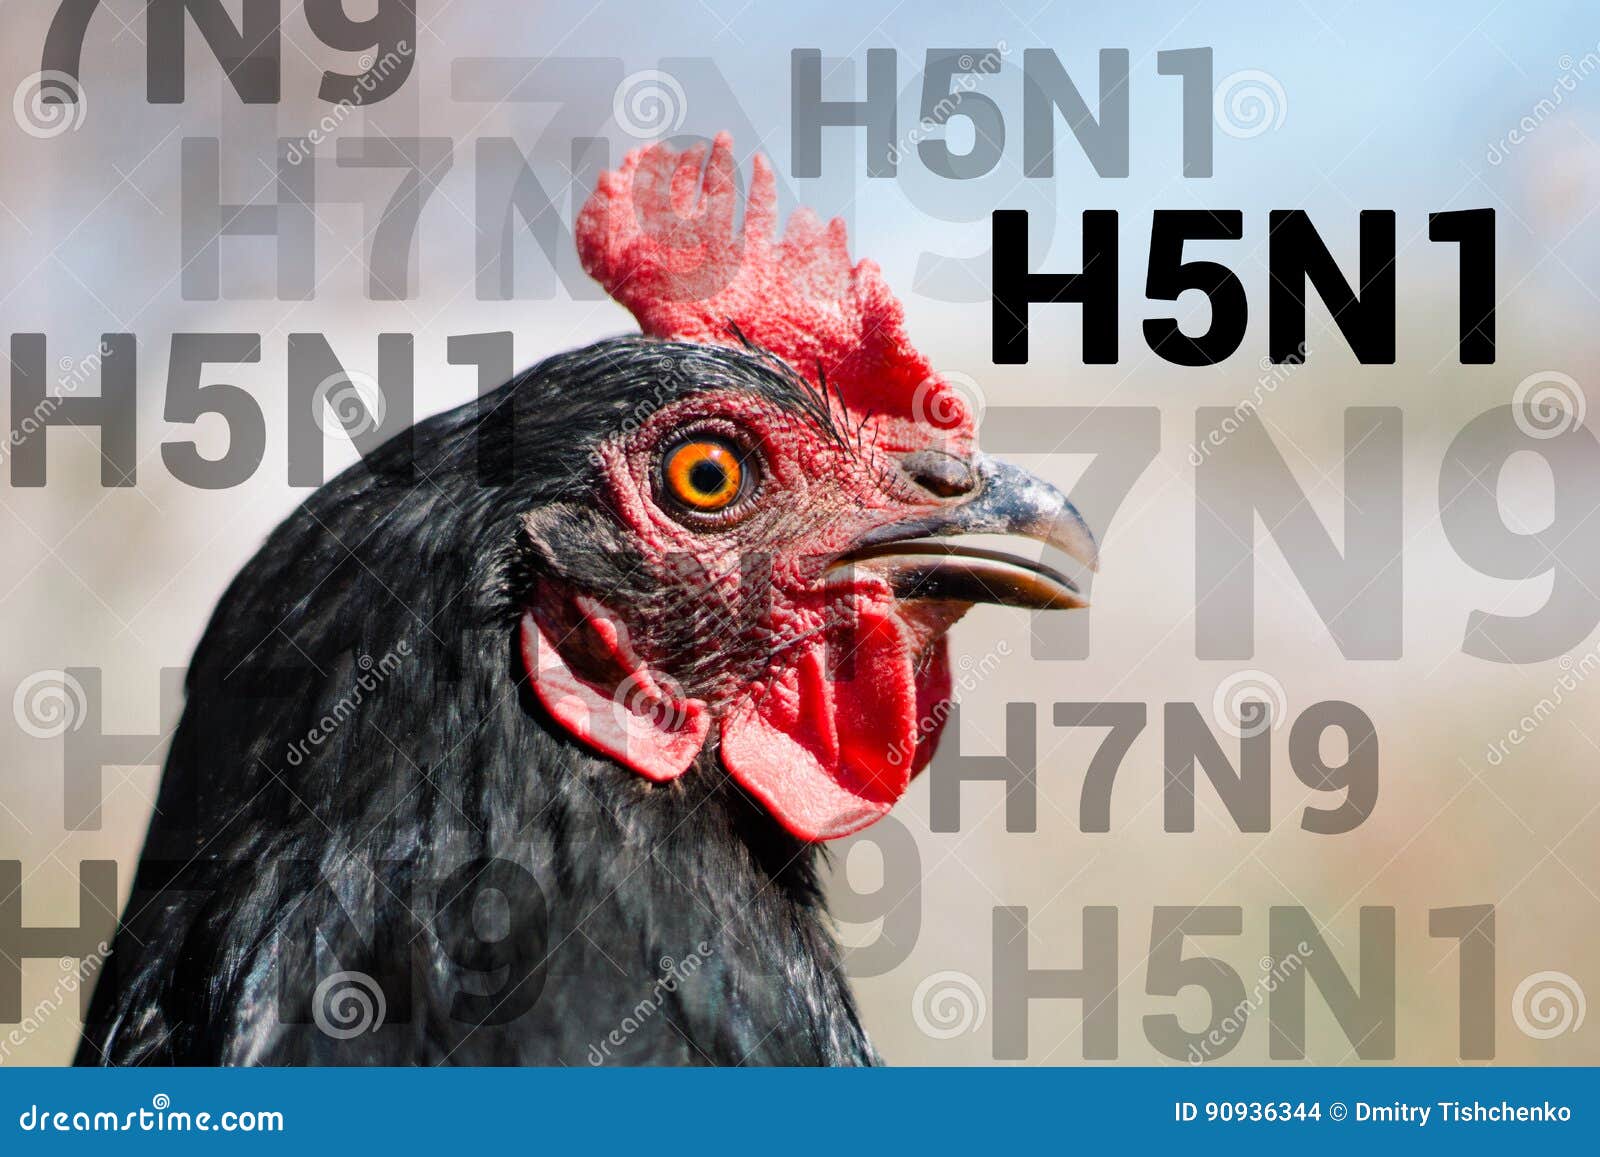 beautiful chicken, close-up, sign h5n1 concept of poultry. the threat of avian influenza and illness among poultry.